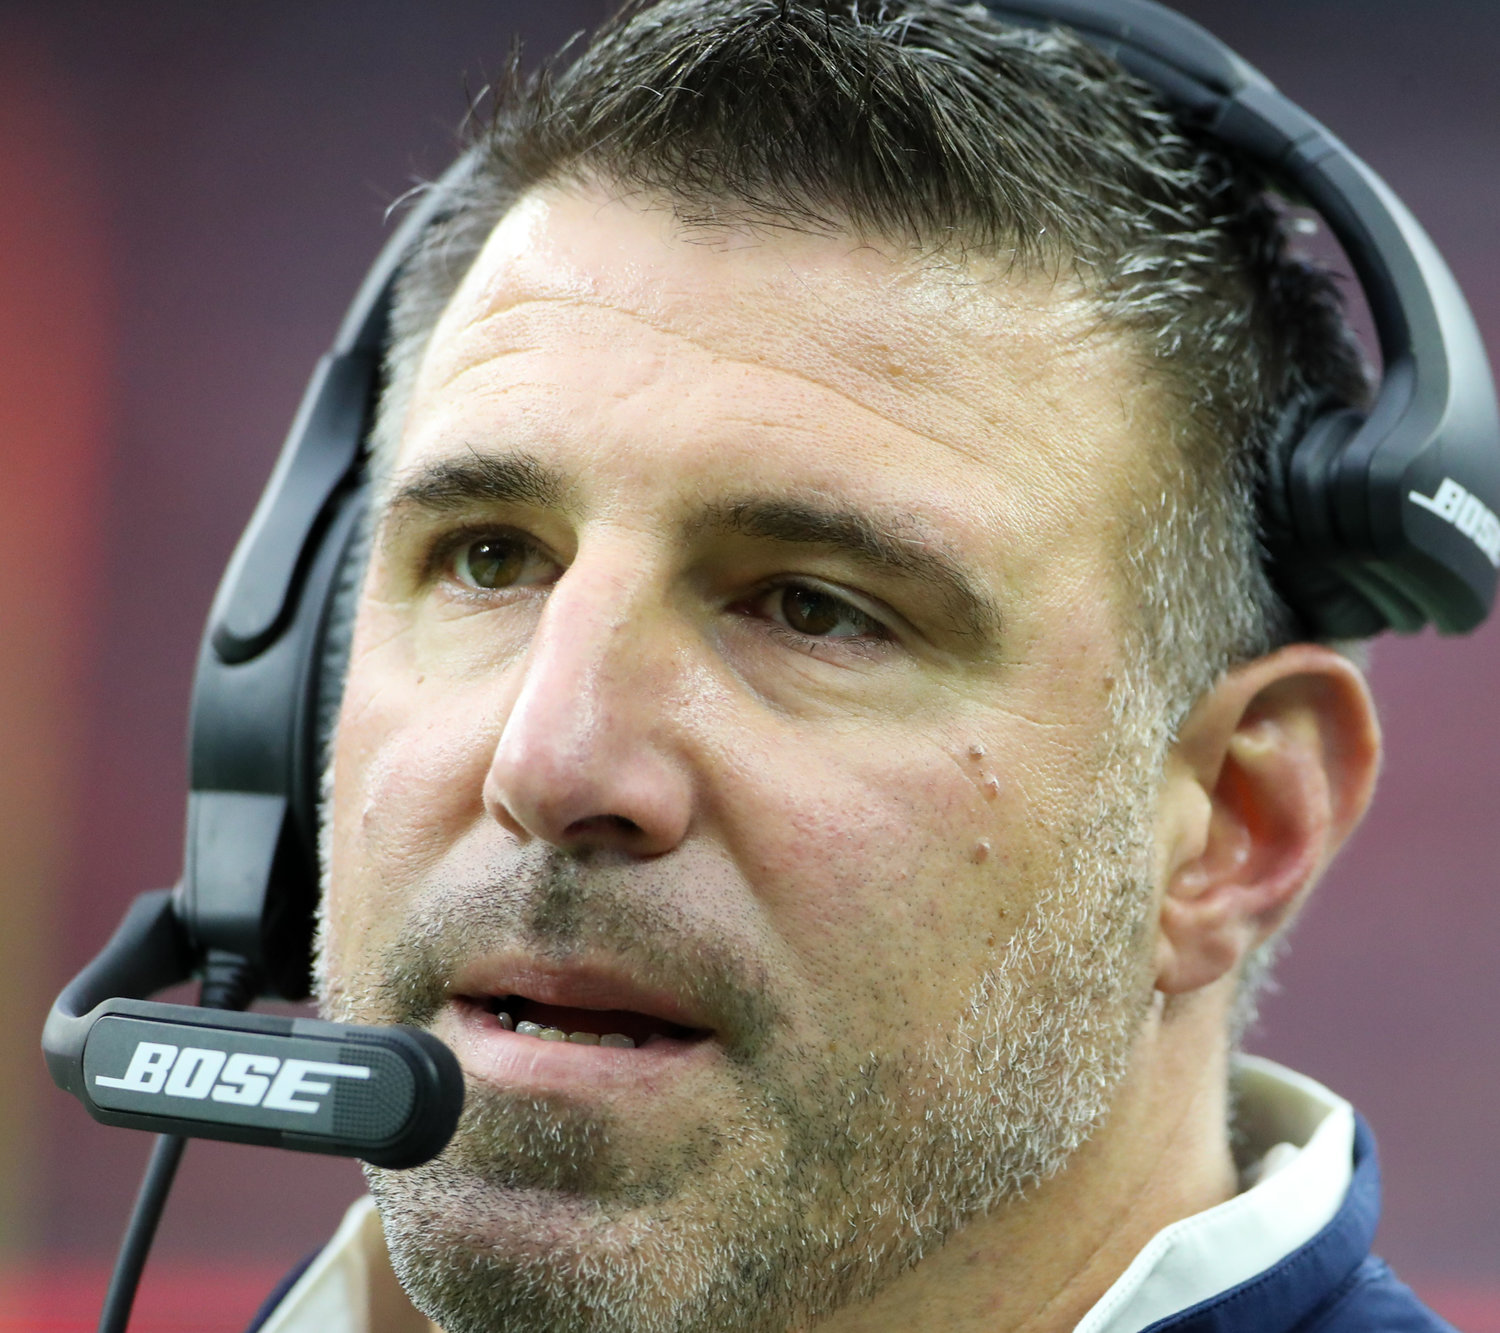 Tennessee Titans head coach Mike Vrabel during an NFL game between the Texans and the Titans on Jan. 9, 2022 in Houston, Texas.